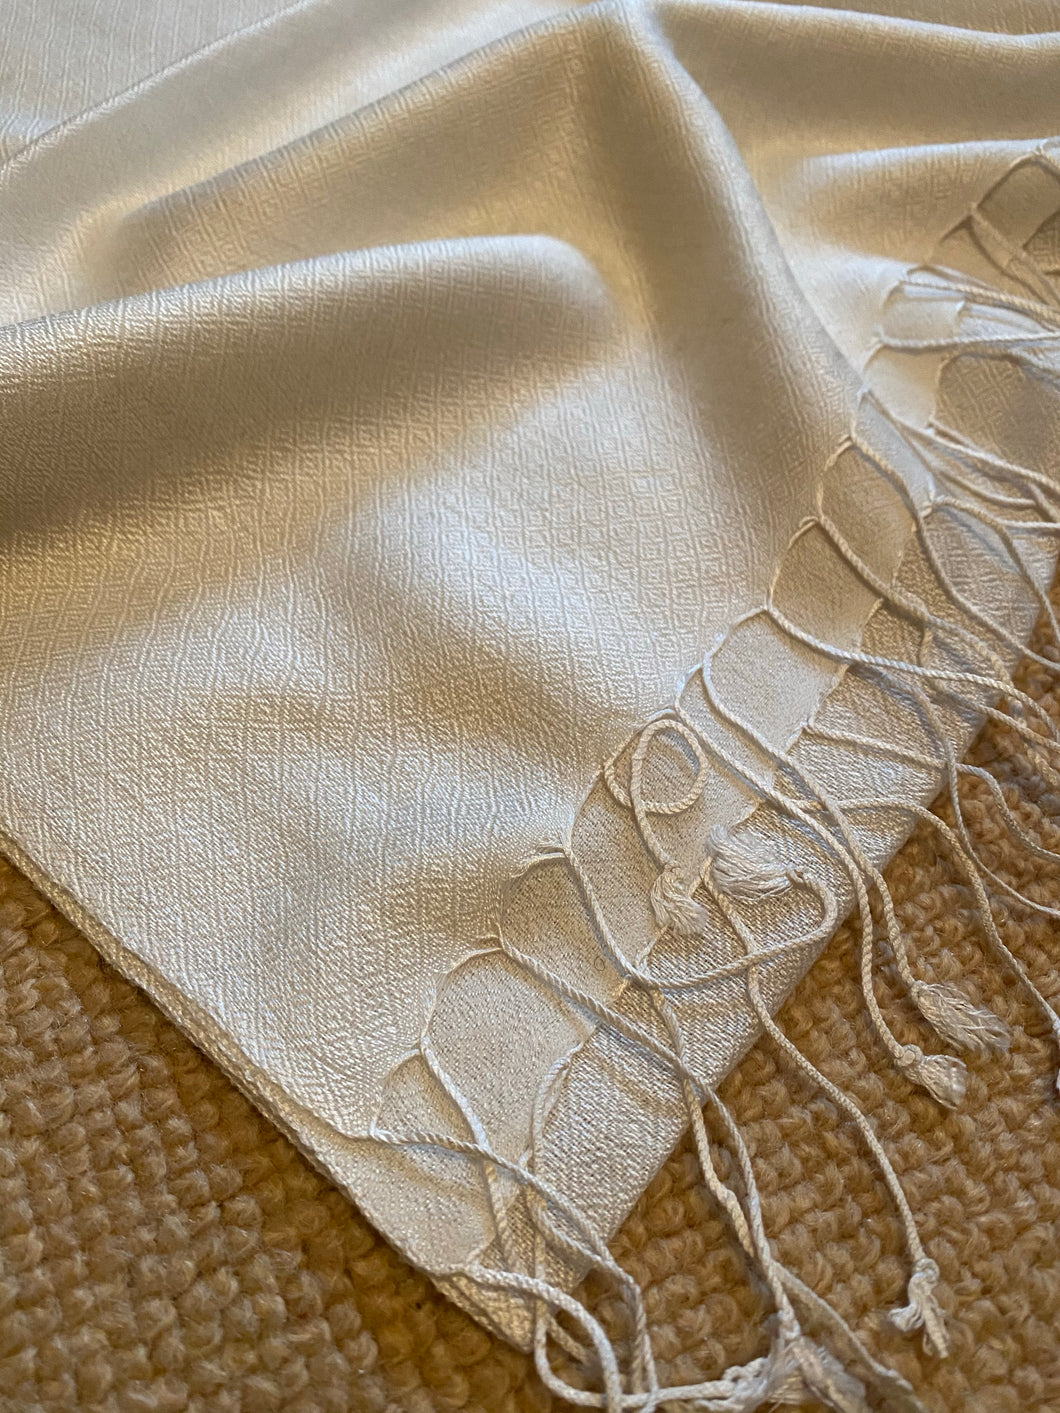 SU119 Winter white, long, plain wool scarf with tassles